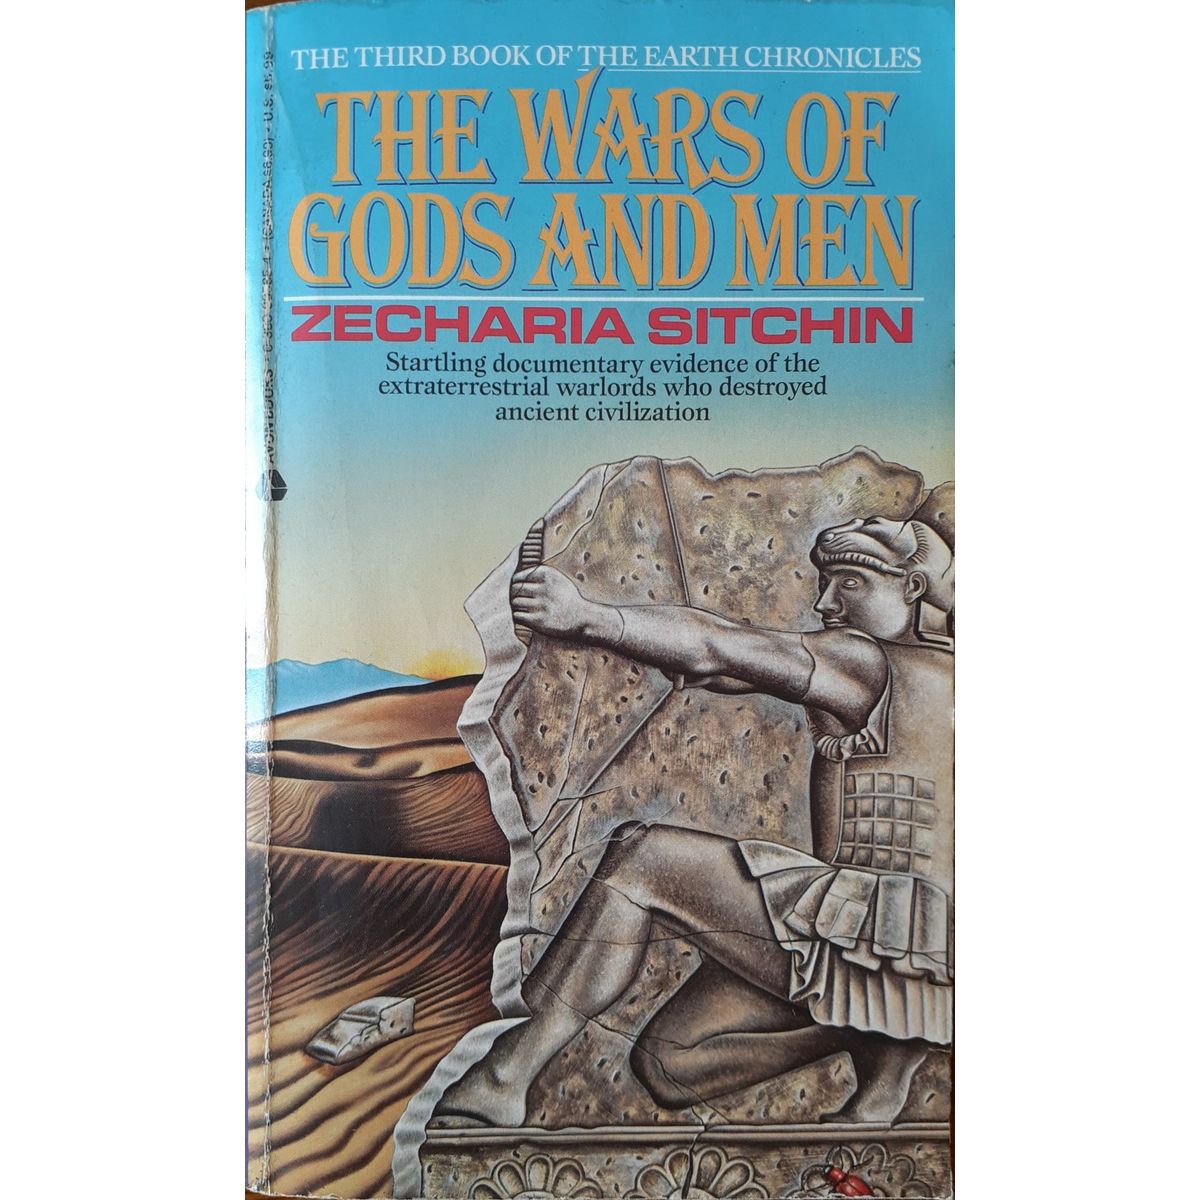 ISBN: 9780380895854 / 0380895854 - The Wars of Gods and Men by Zechariah Sitchin [1985]